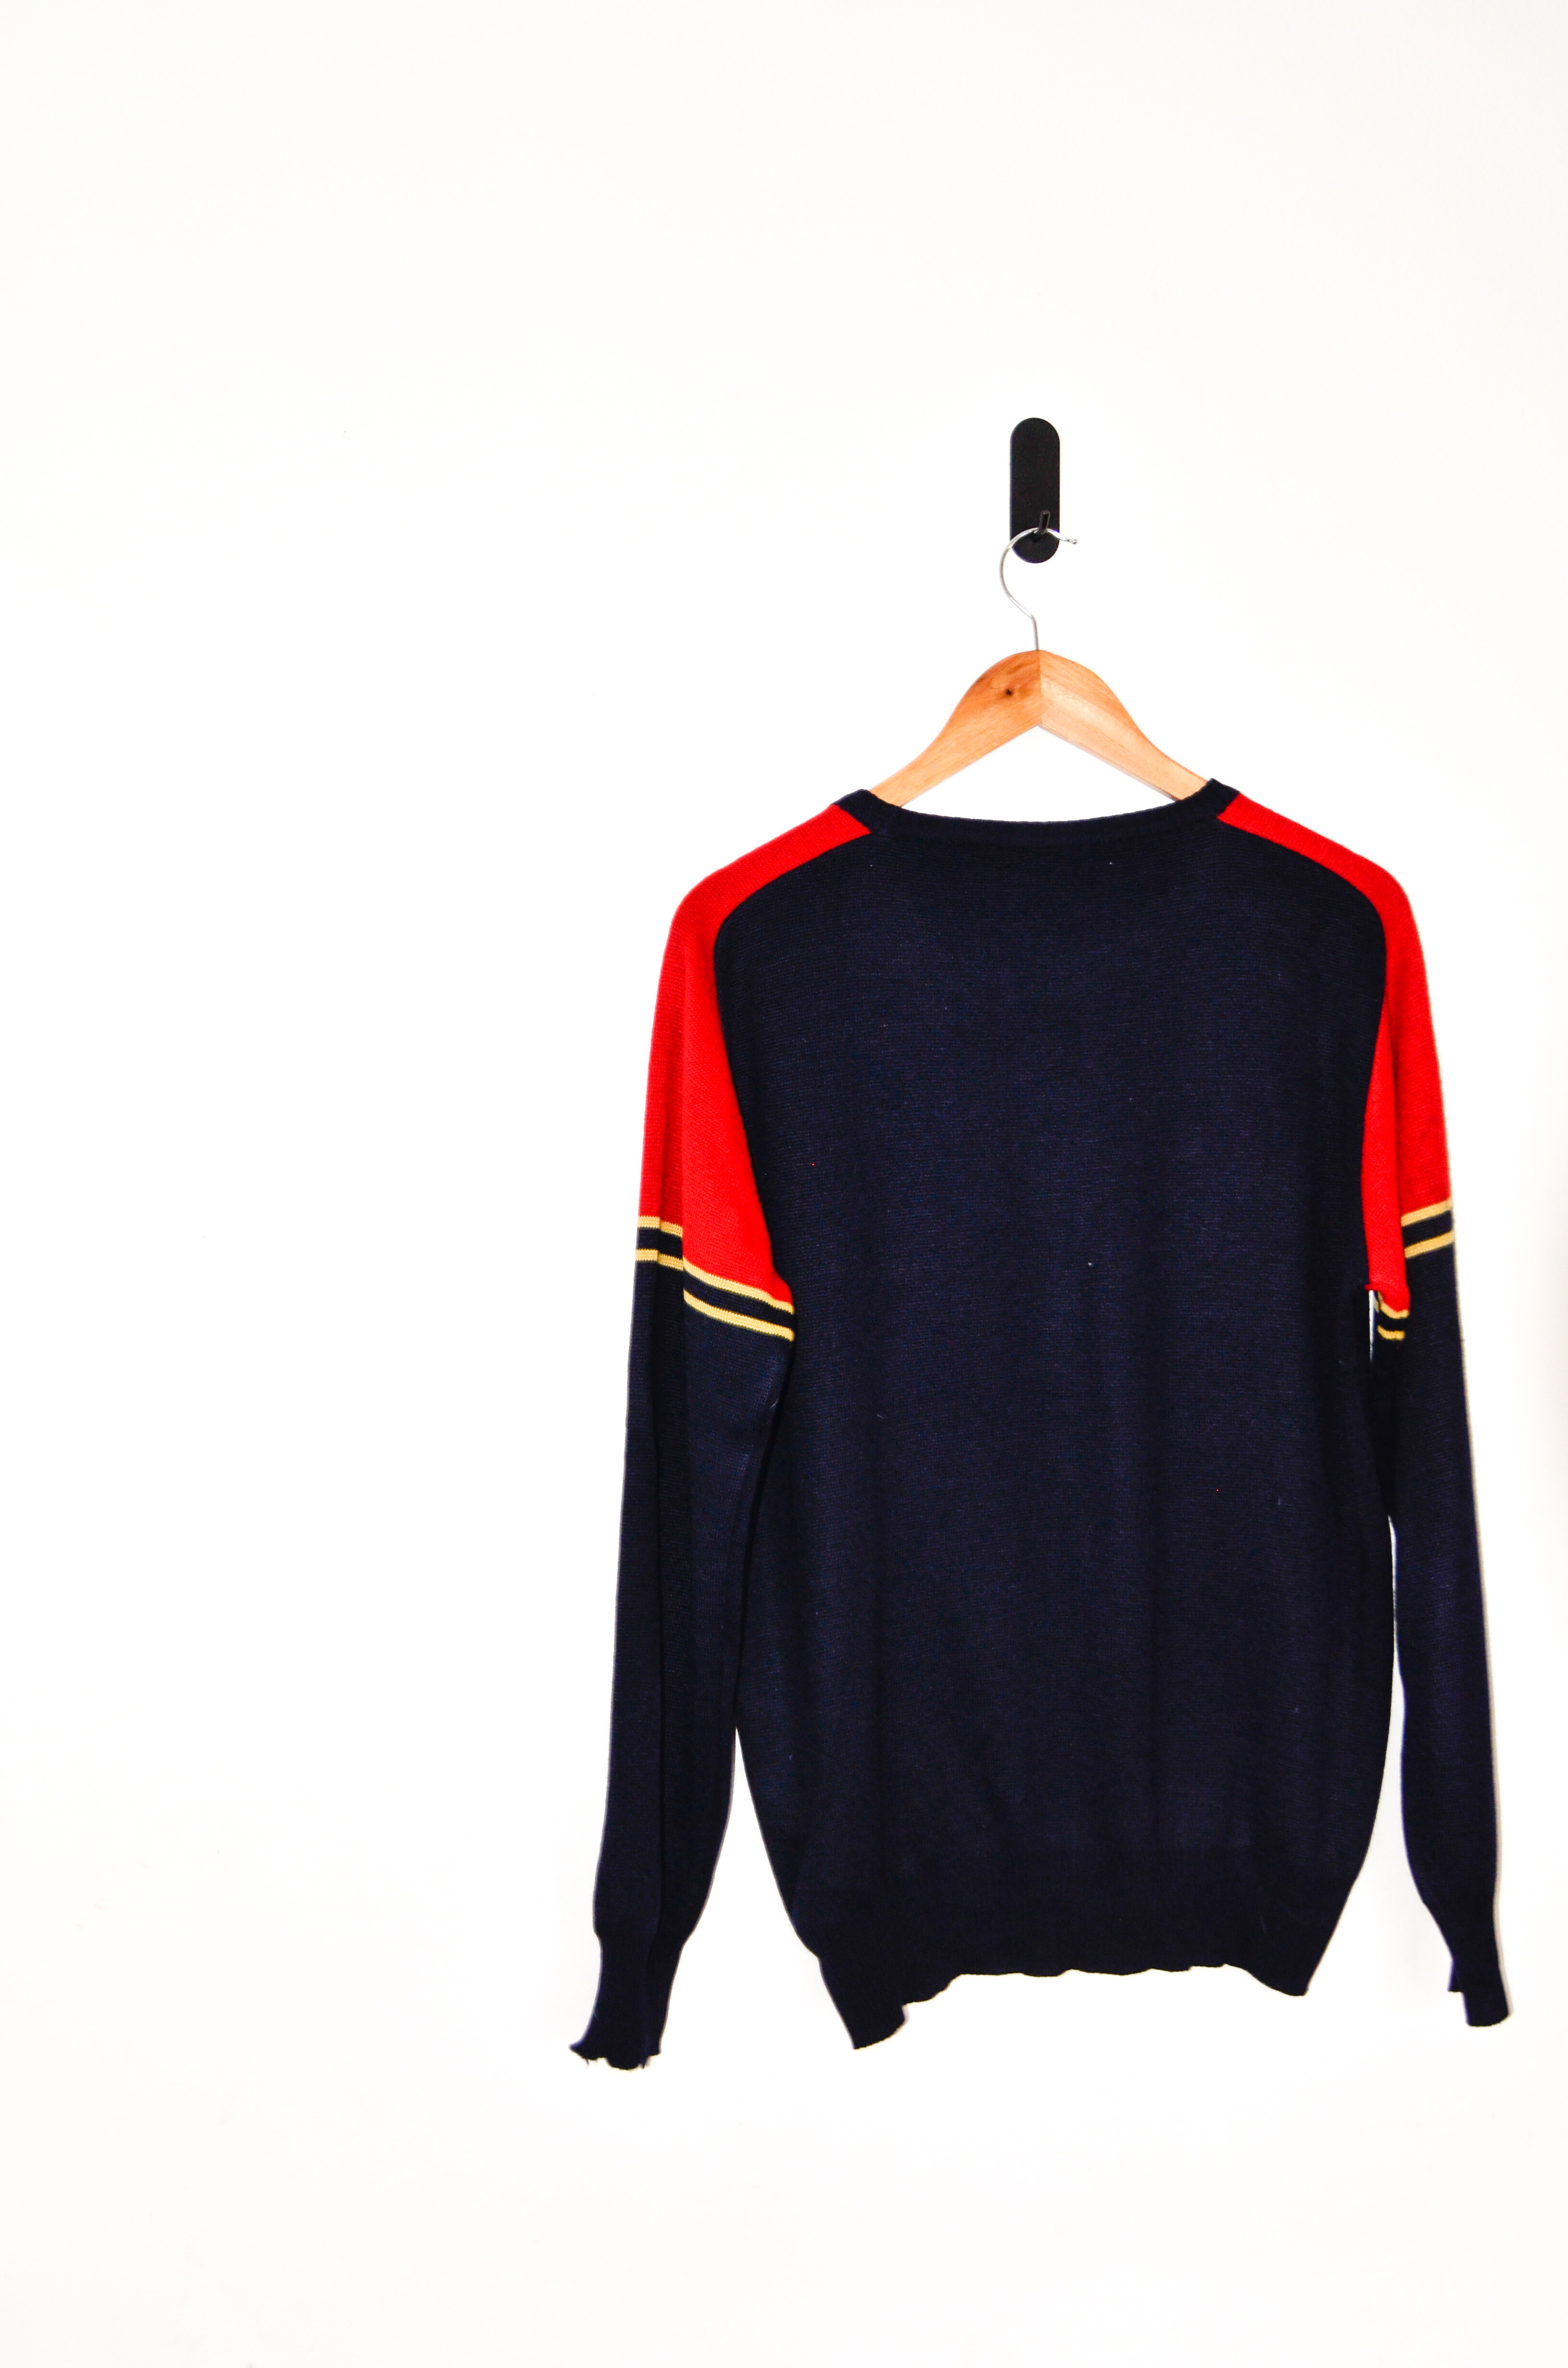 Sweater navy & red